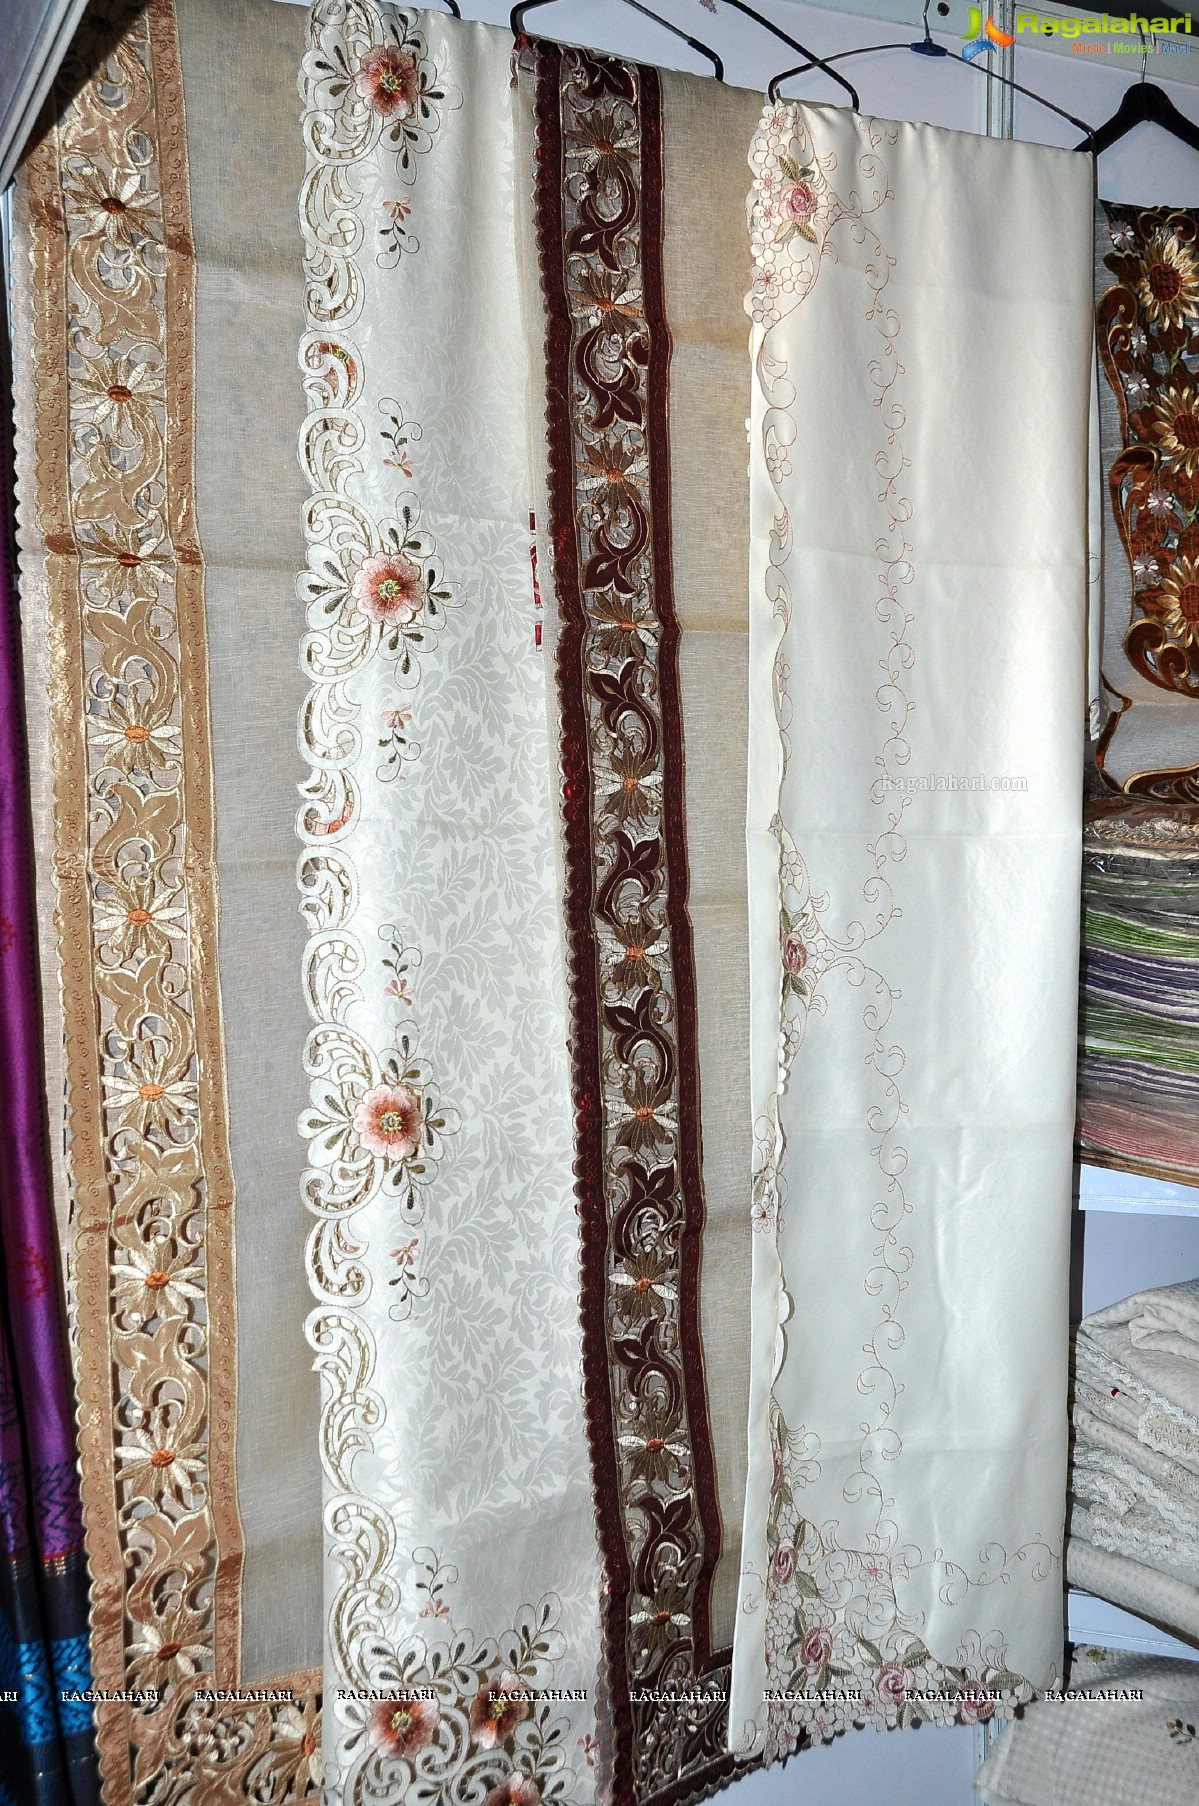 Weaves - The Cotton and Silk Spectrum at Sri Satya Sai Nigamagamam